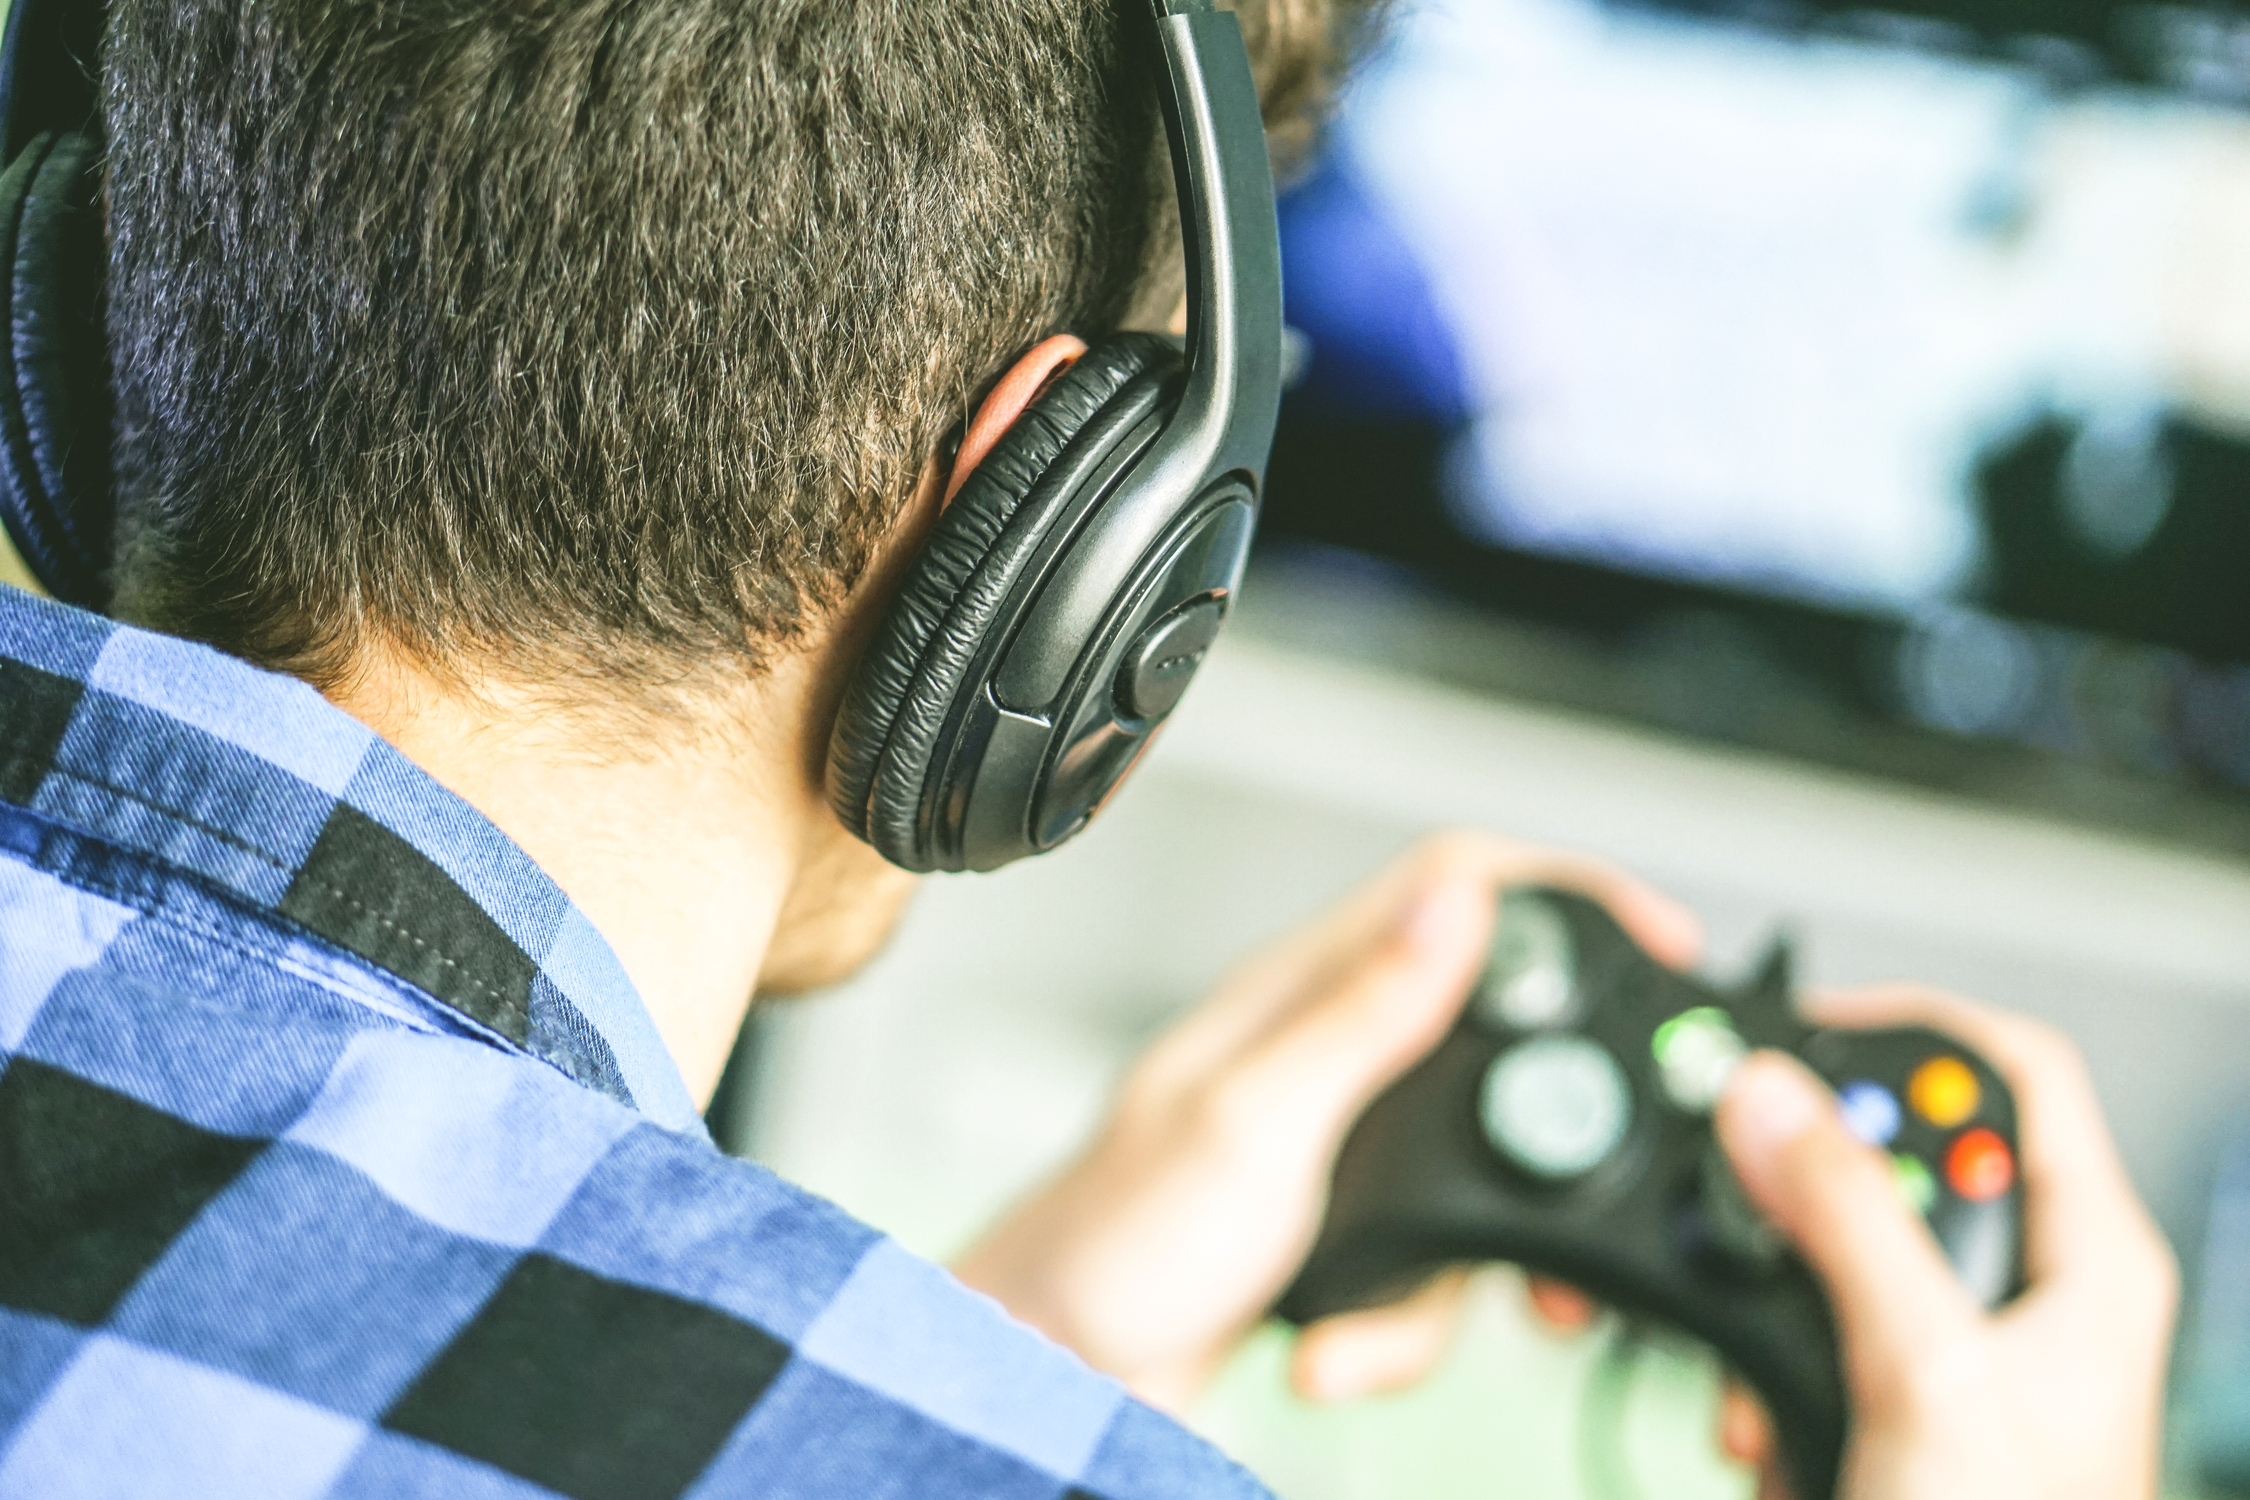 Gamer playing Xbox One with headset on.